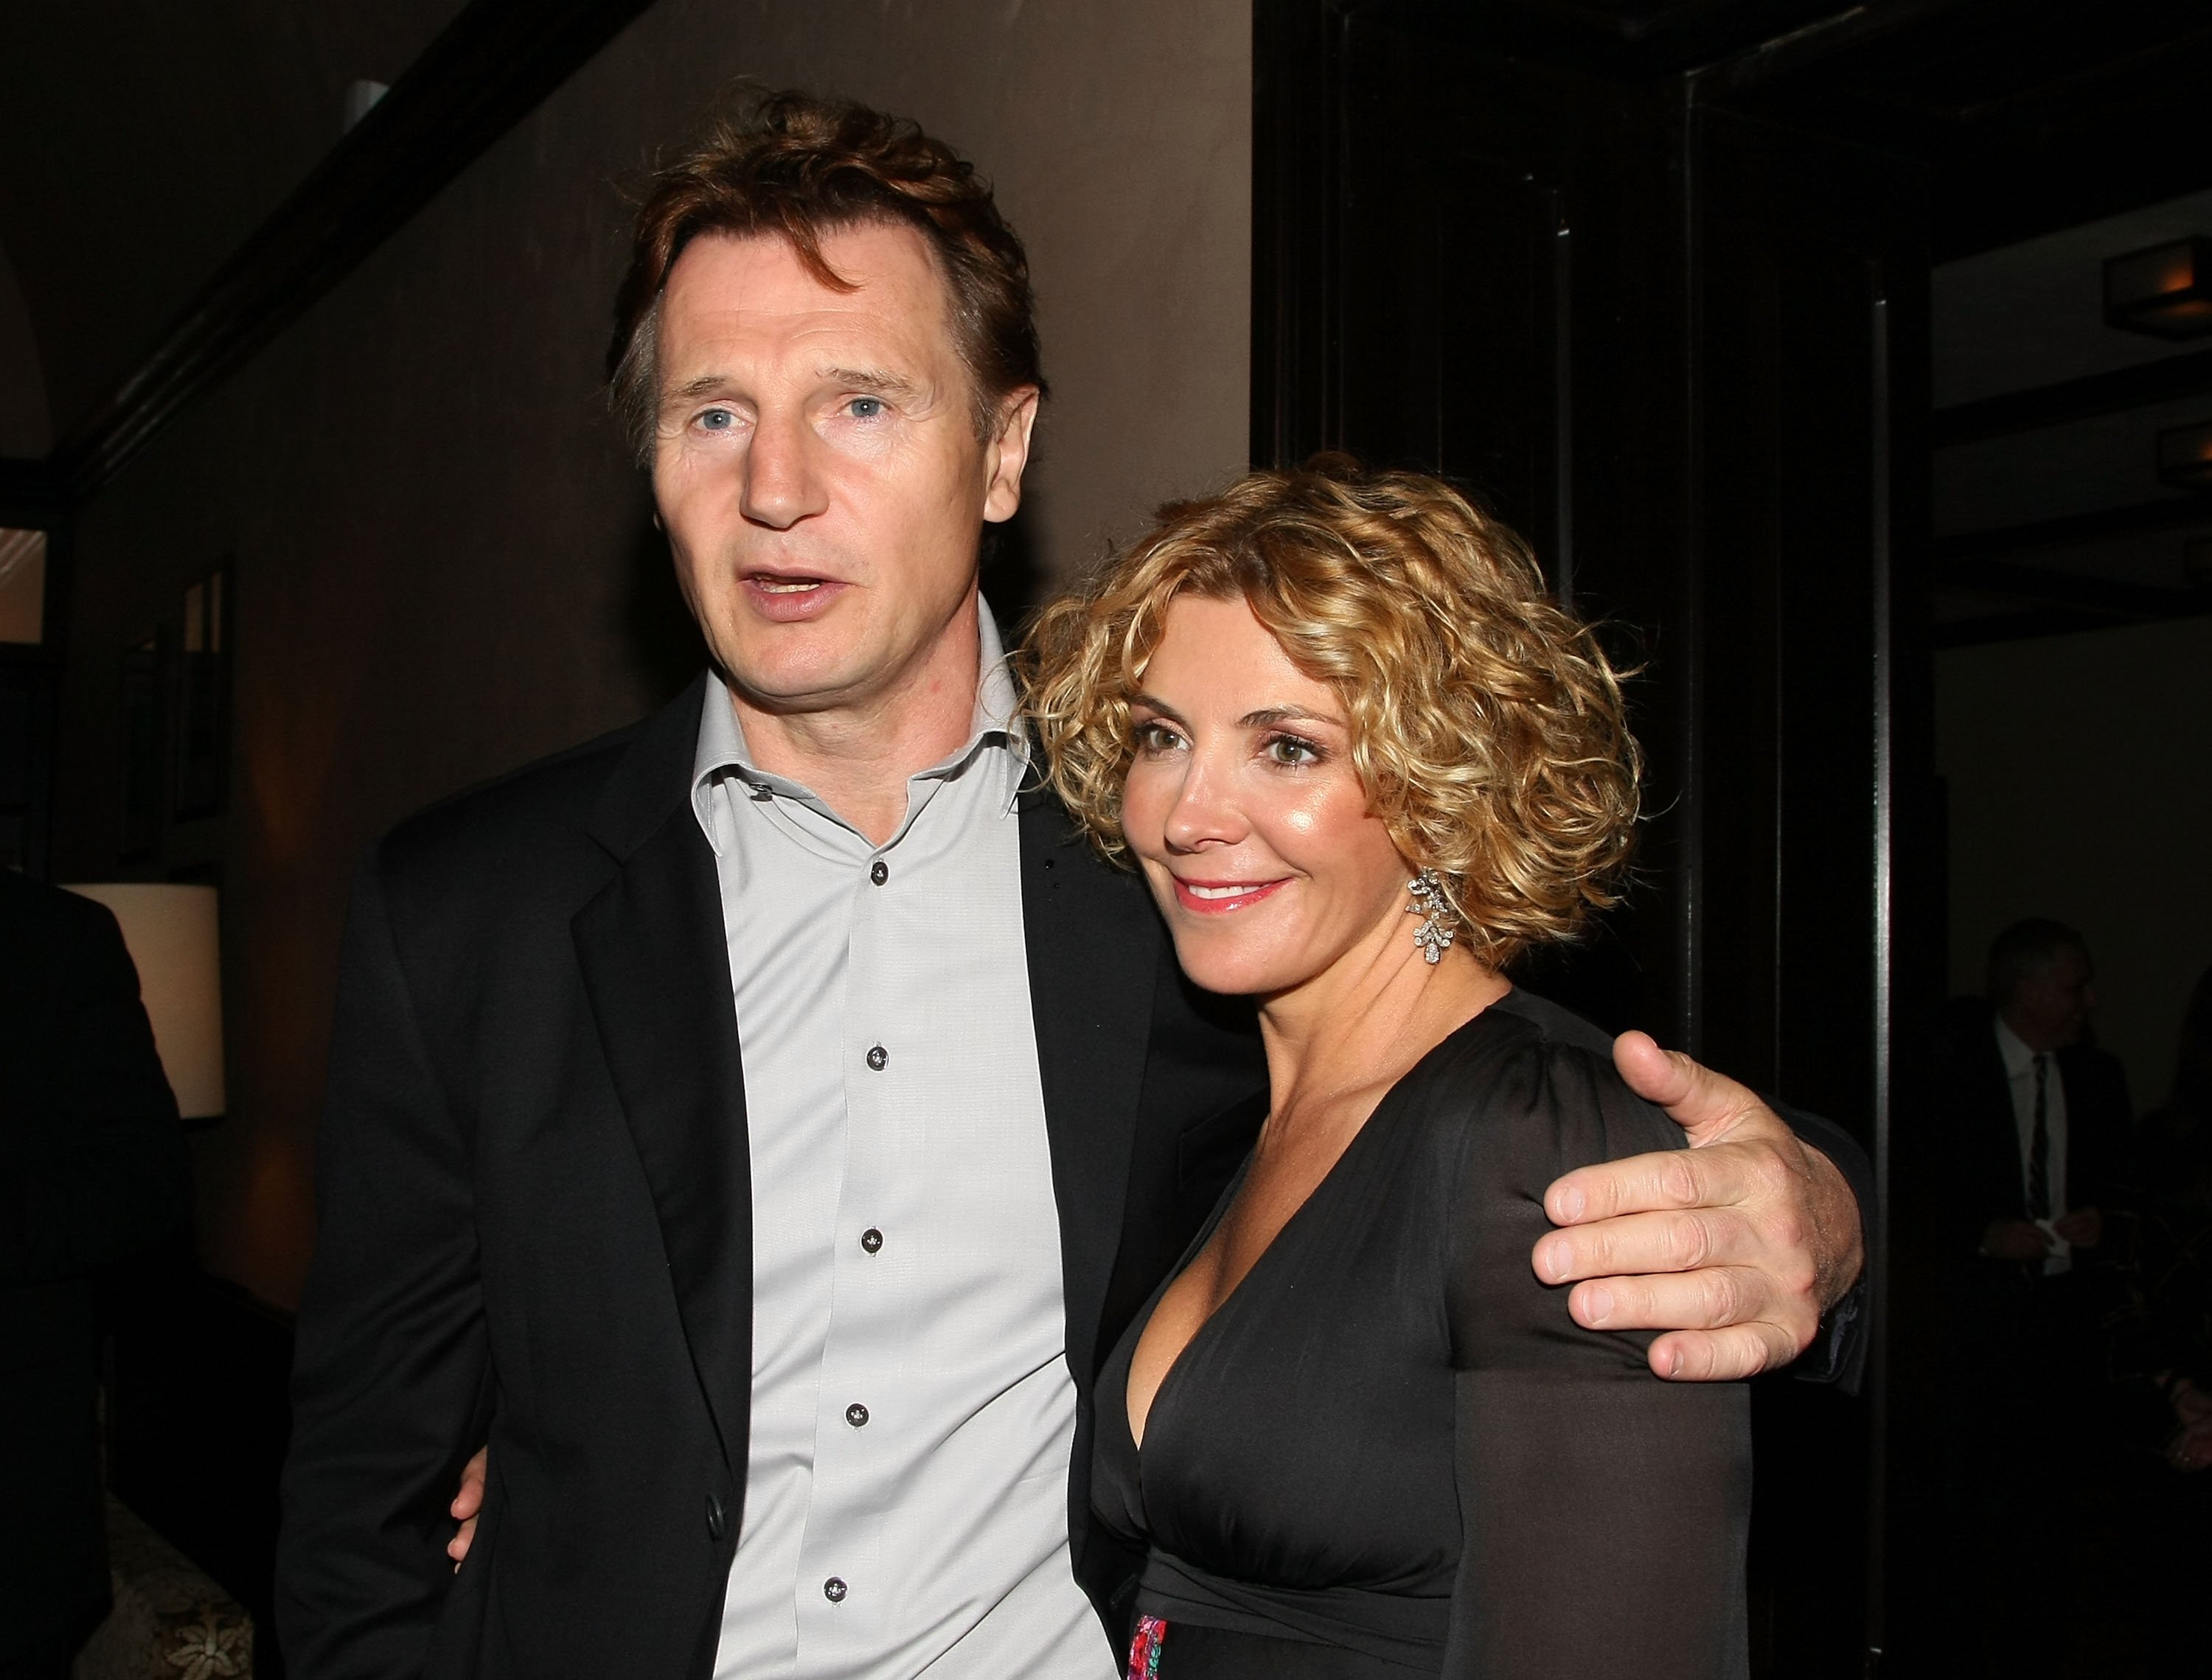 Liam Neeson and Natasha Richardson attending the Chanel Dinner at the Greenwich Hotel during the 2008 Tribeca Film Festival on April 28, 2008 in New York City. / Source: Getty Images